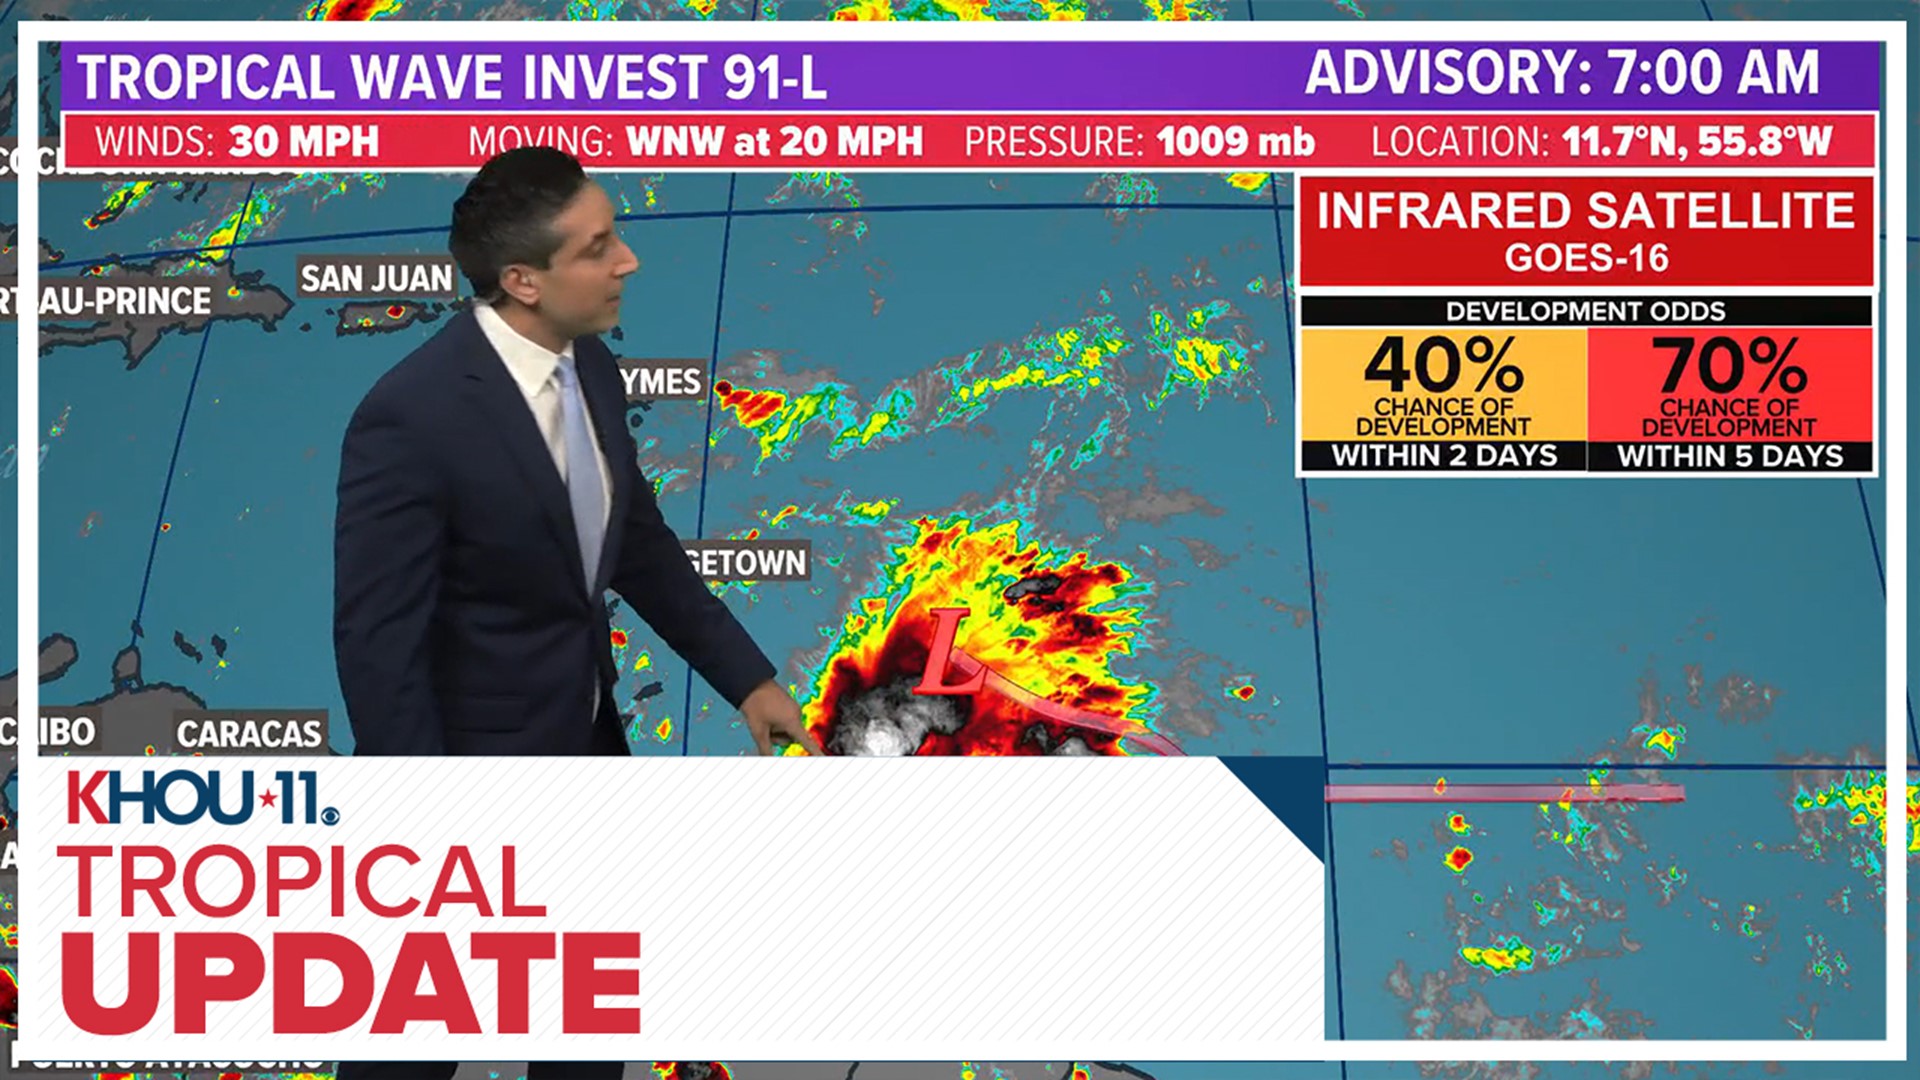 KHOU 11 Meteorologist Tim Pandajis is tracking the tropics, where two systems have a high chance of development.